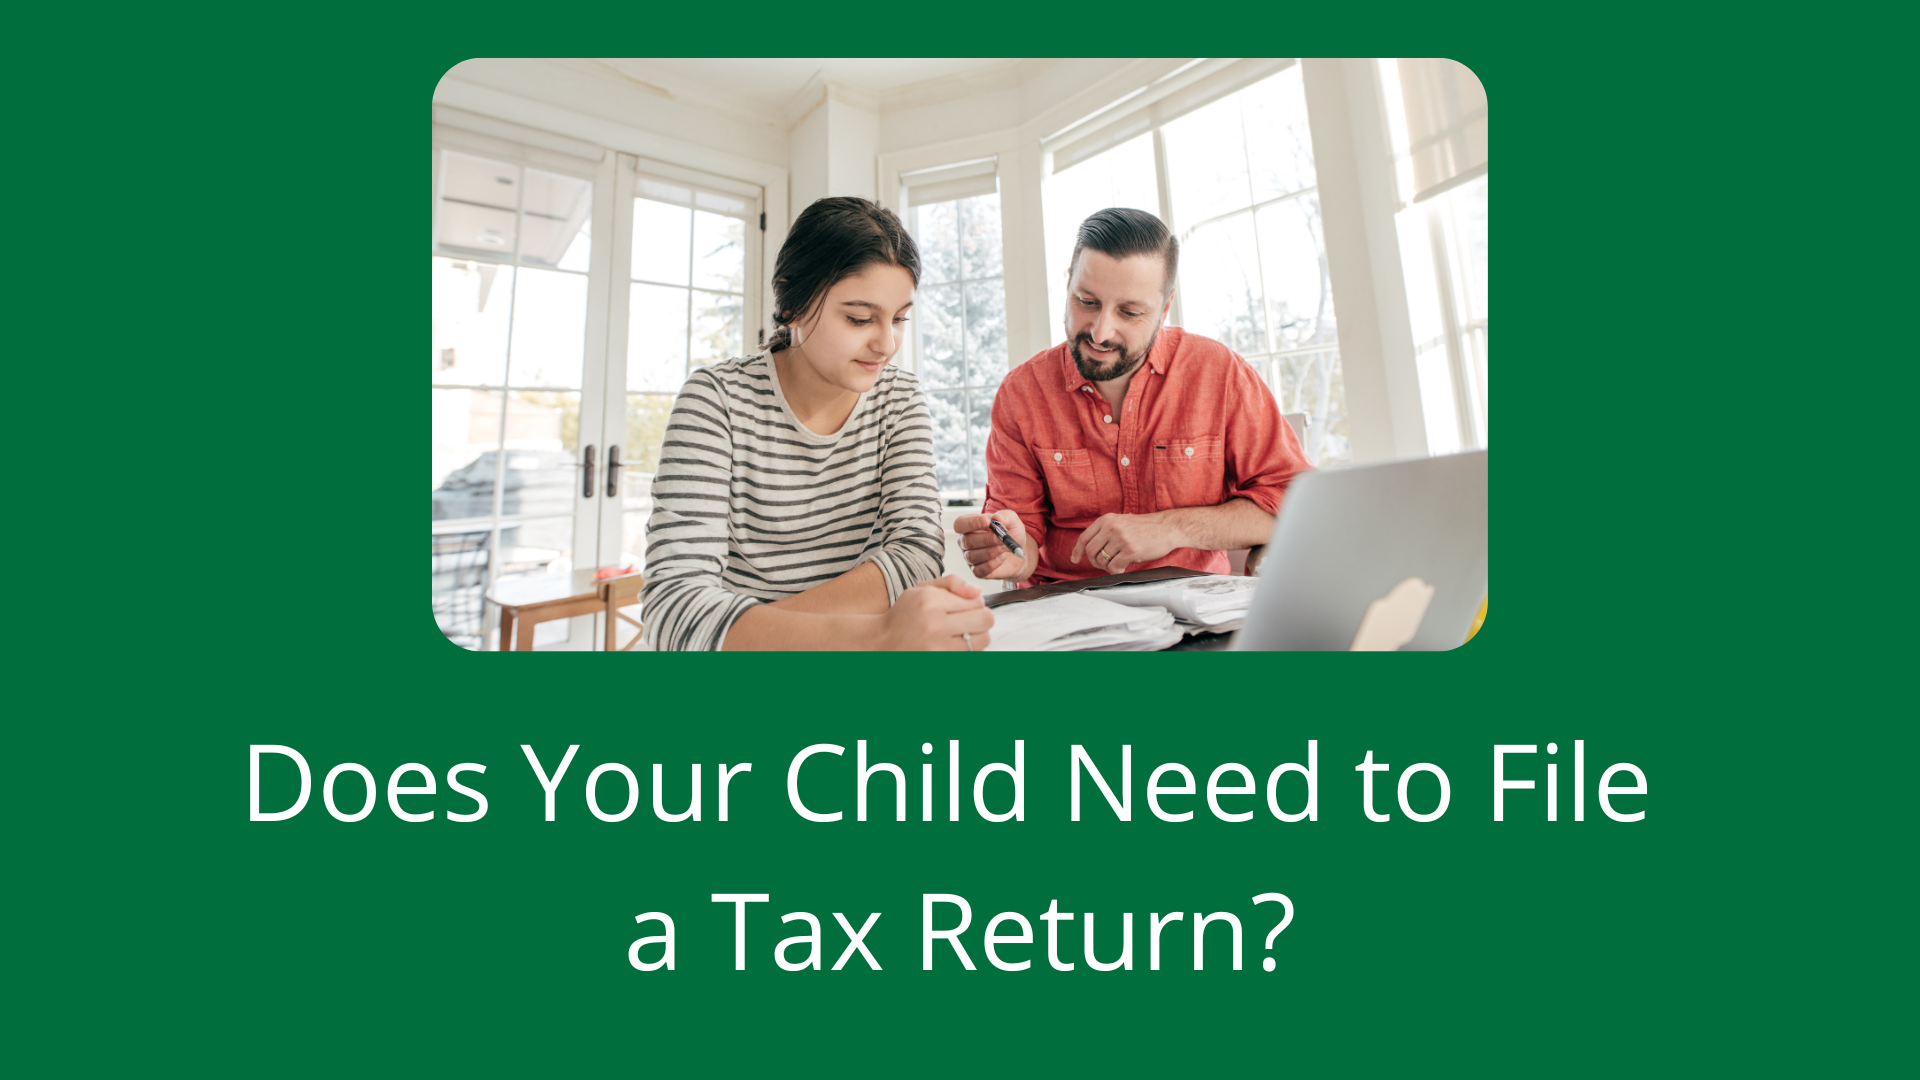 Does Your Child Need to File a Tax Return?